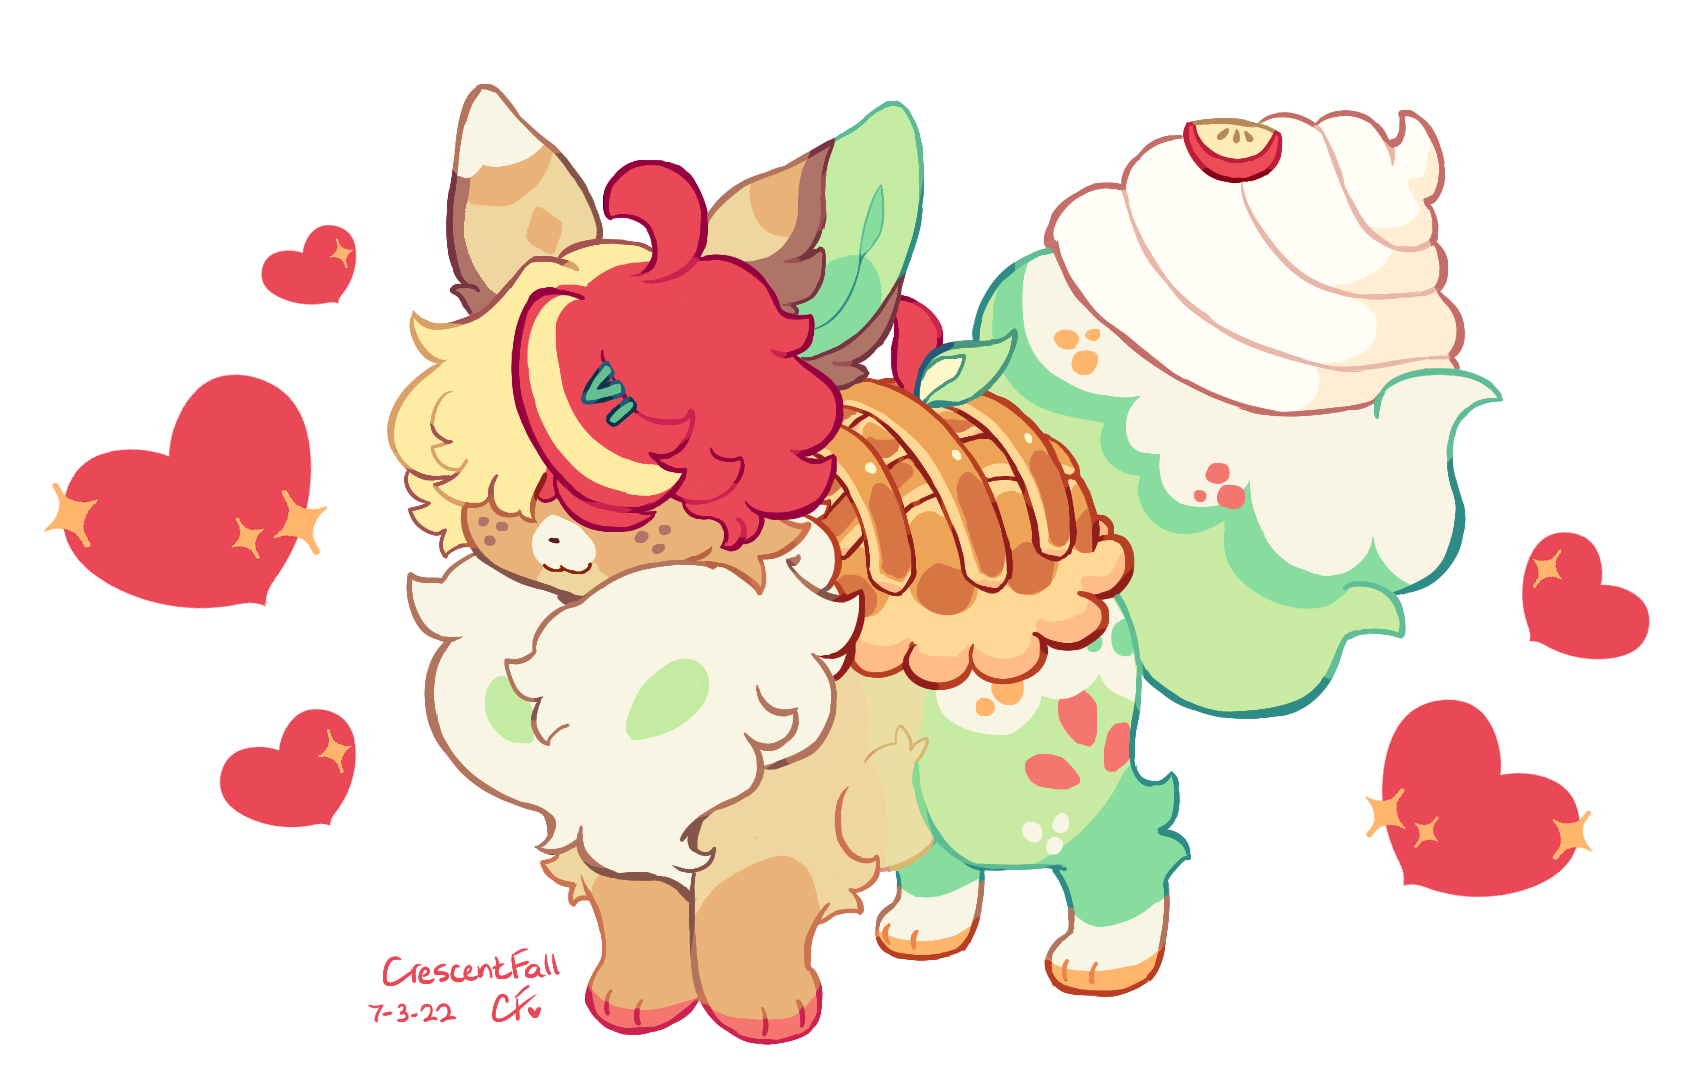 An appletun eevee fusion with cream fur covering its eyes